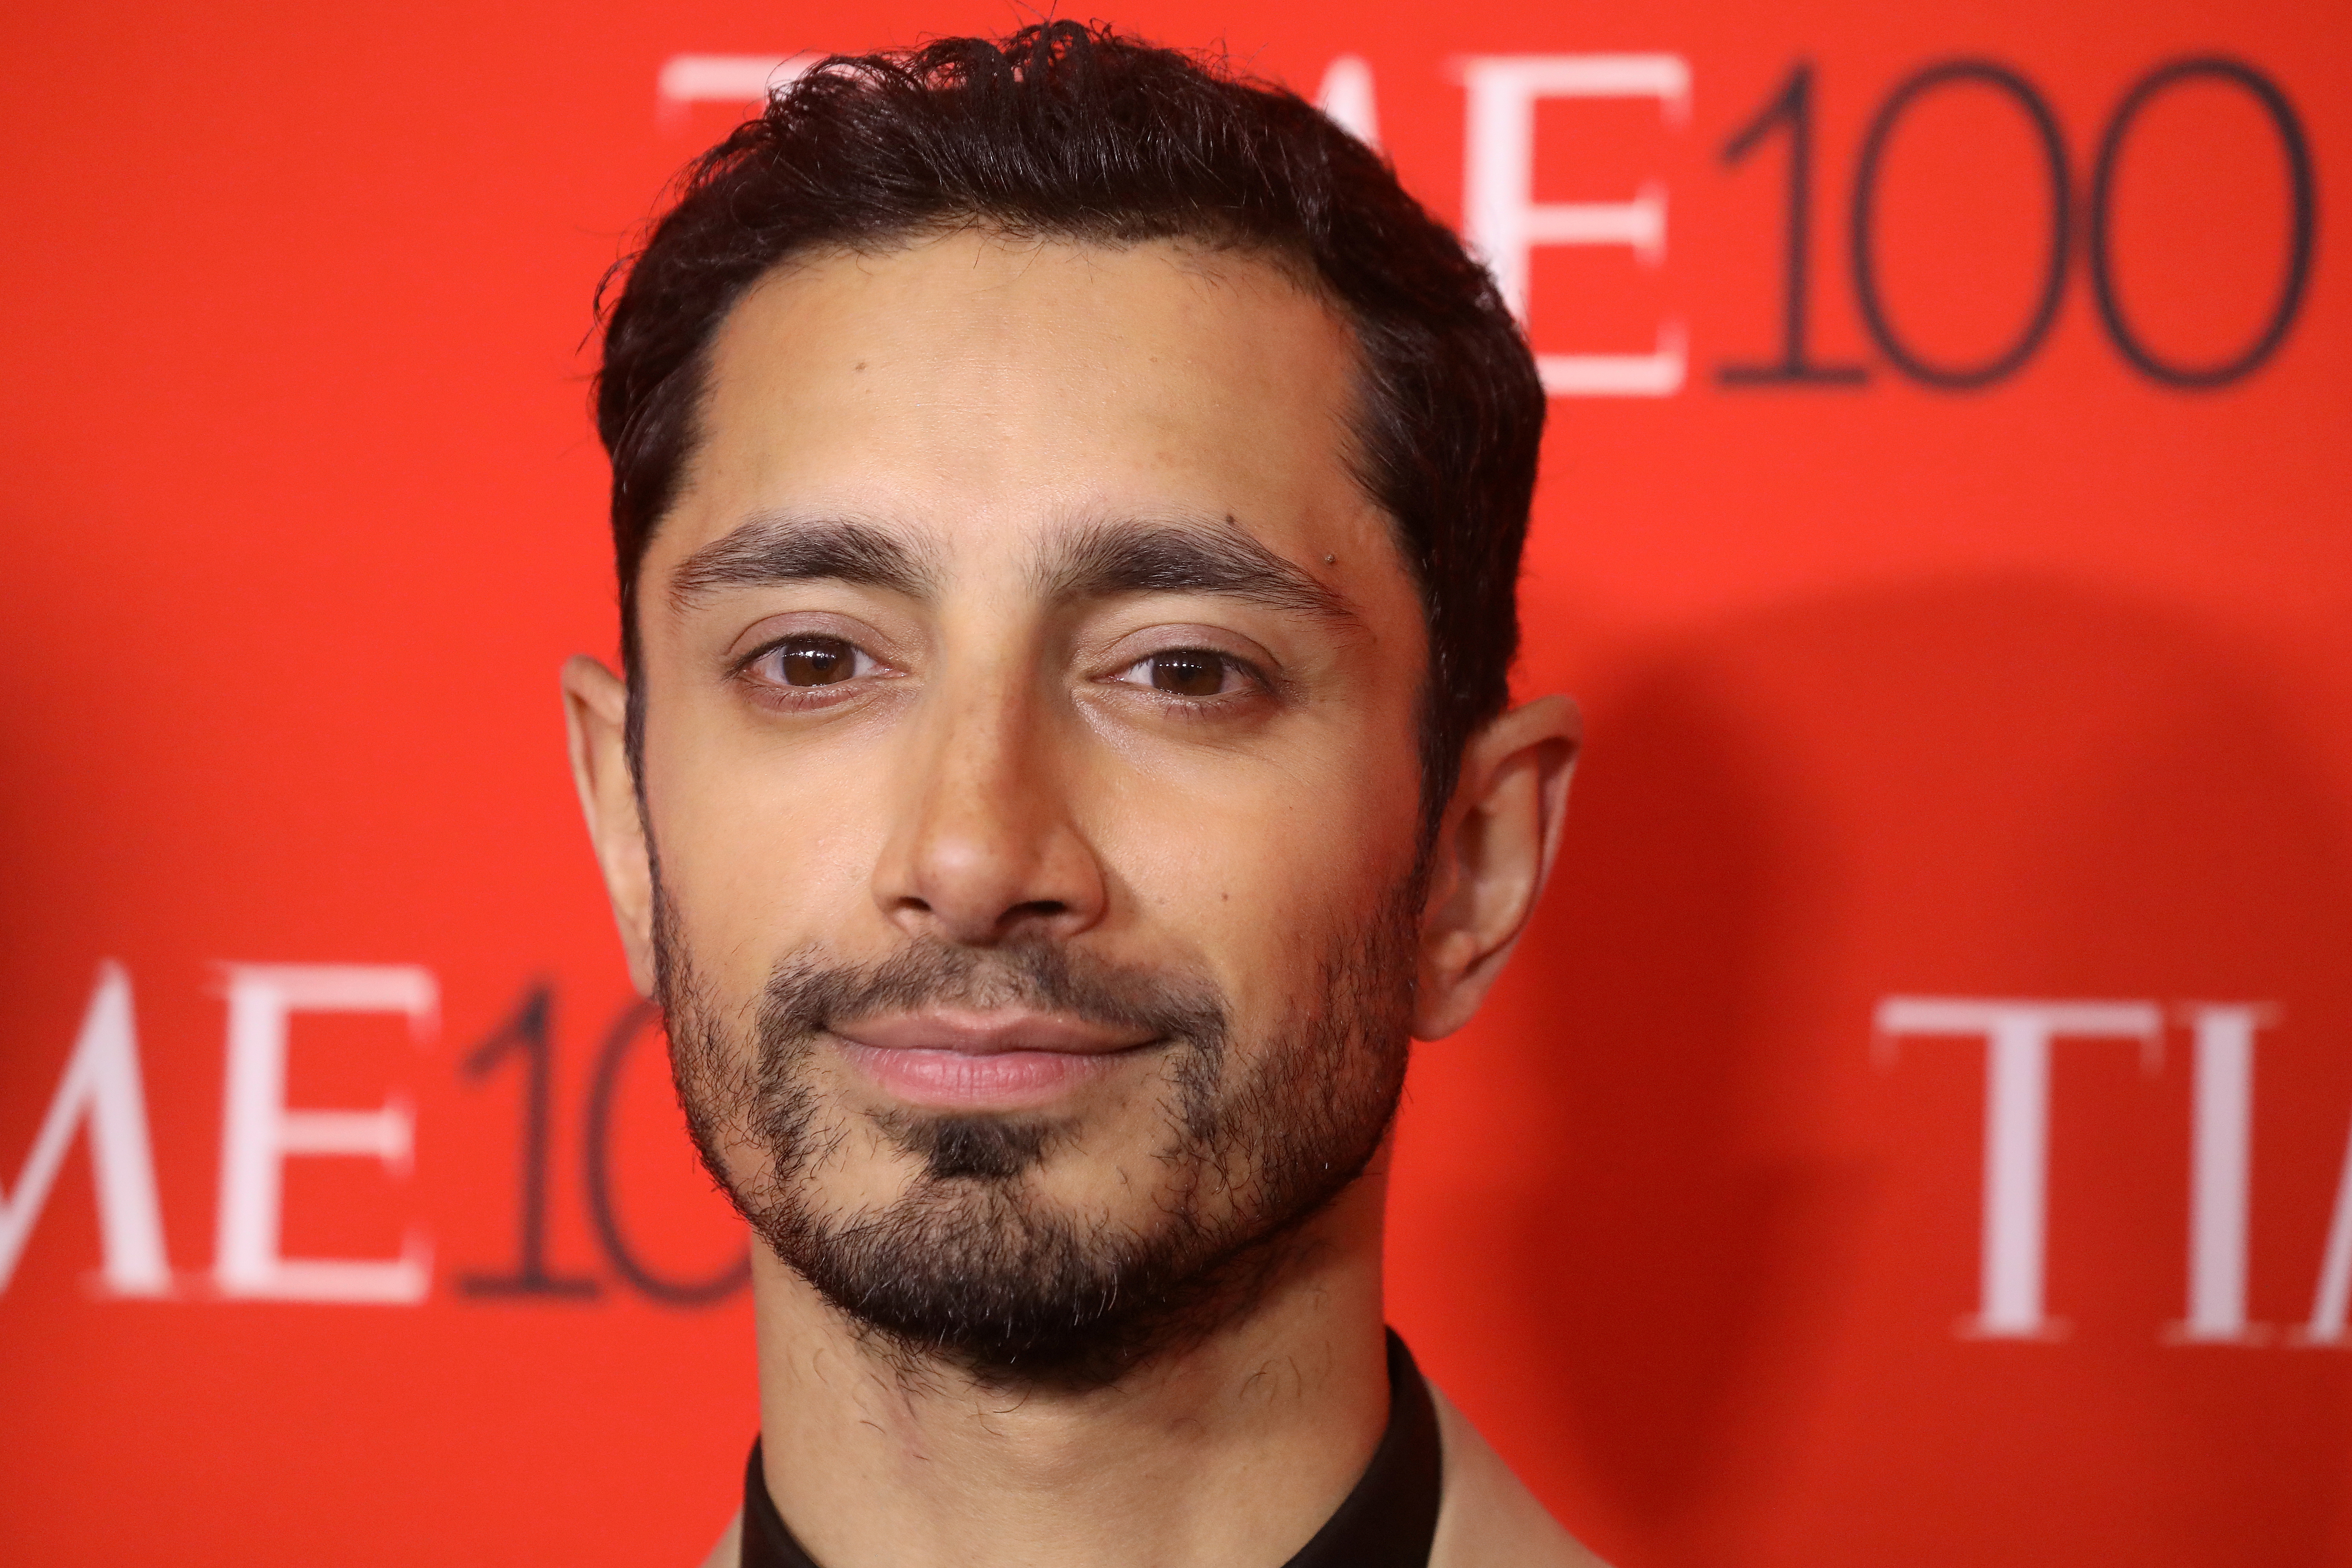 Actor Riz Ahmed arrives for the Time 100 Gala in the Manhattan borough of New York, New York, U.S. April 25, 2017. REUTERS/Carlo Allegri